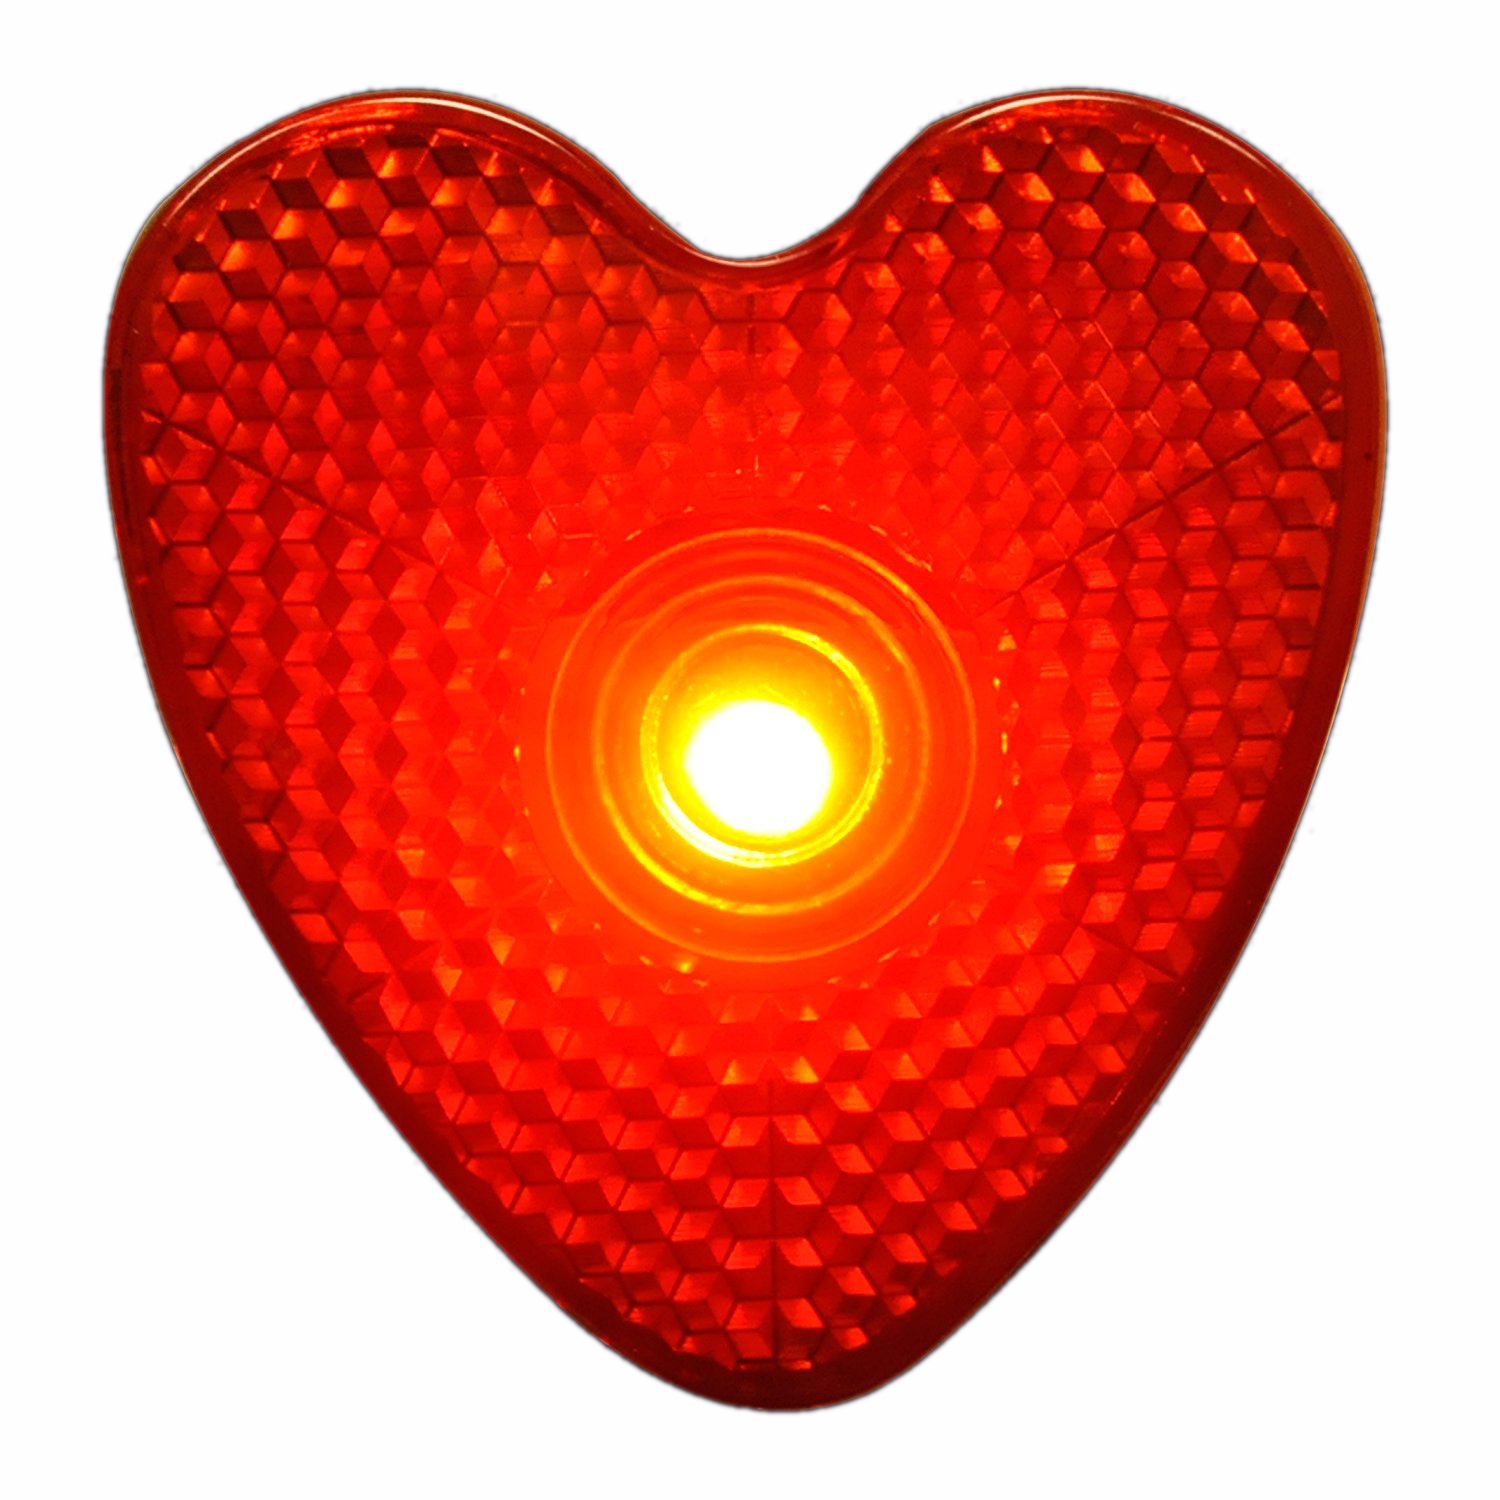 LED Blinking Red Heart Reflector Clip Running Body Light All Products 3